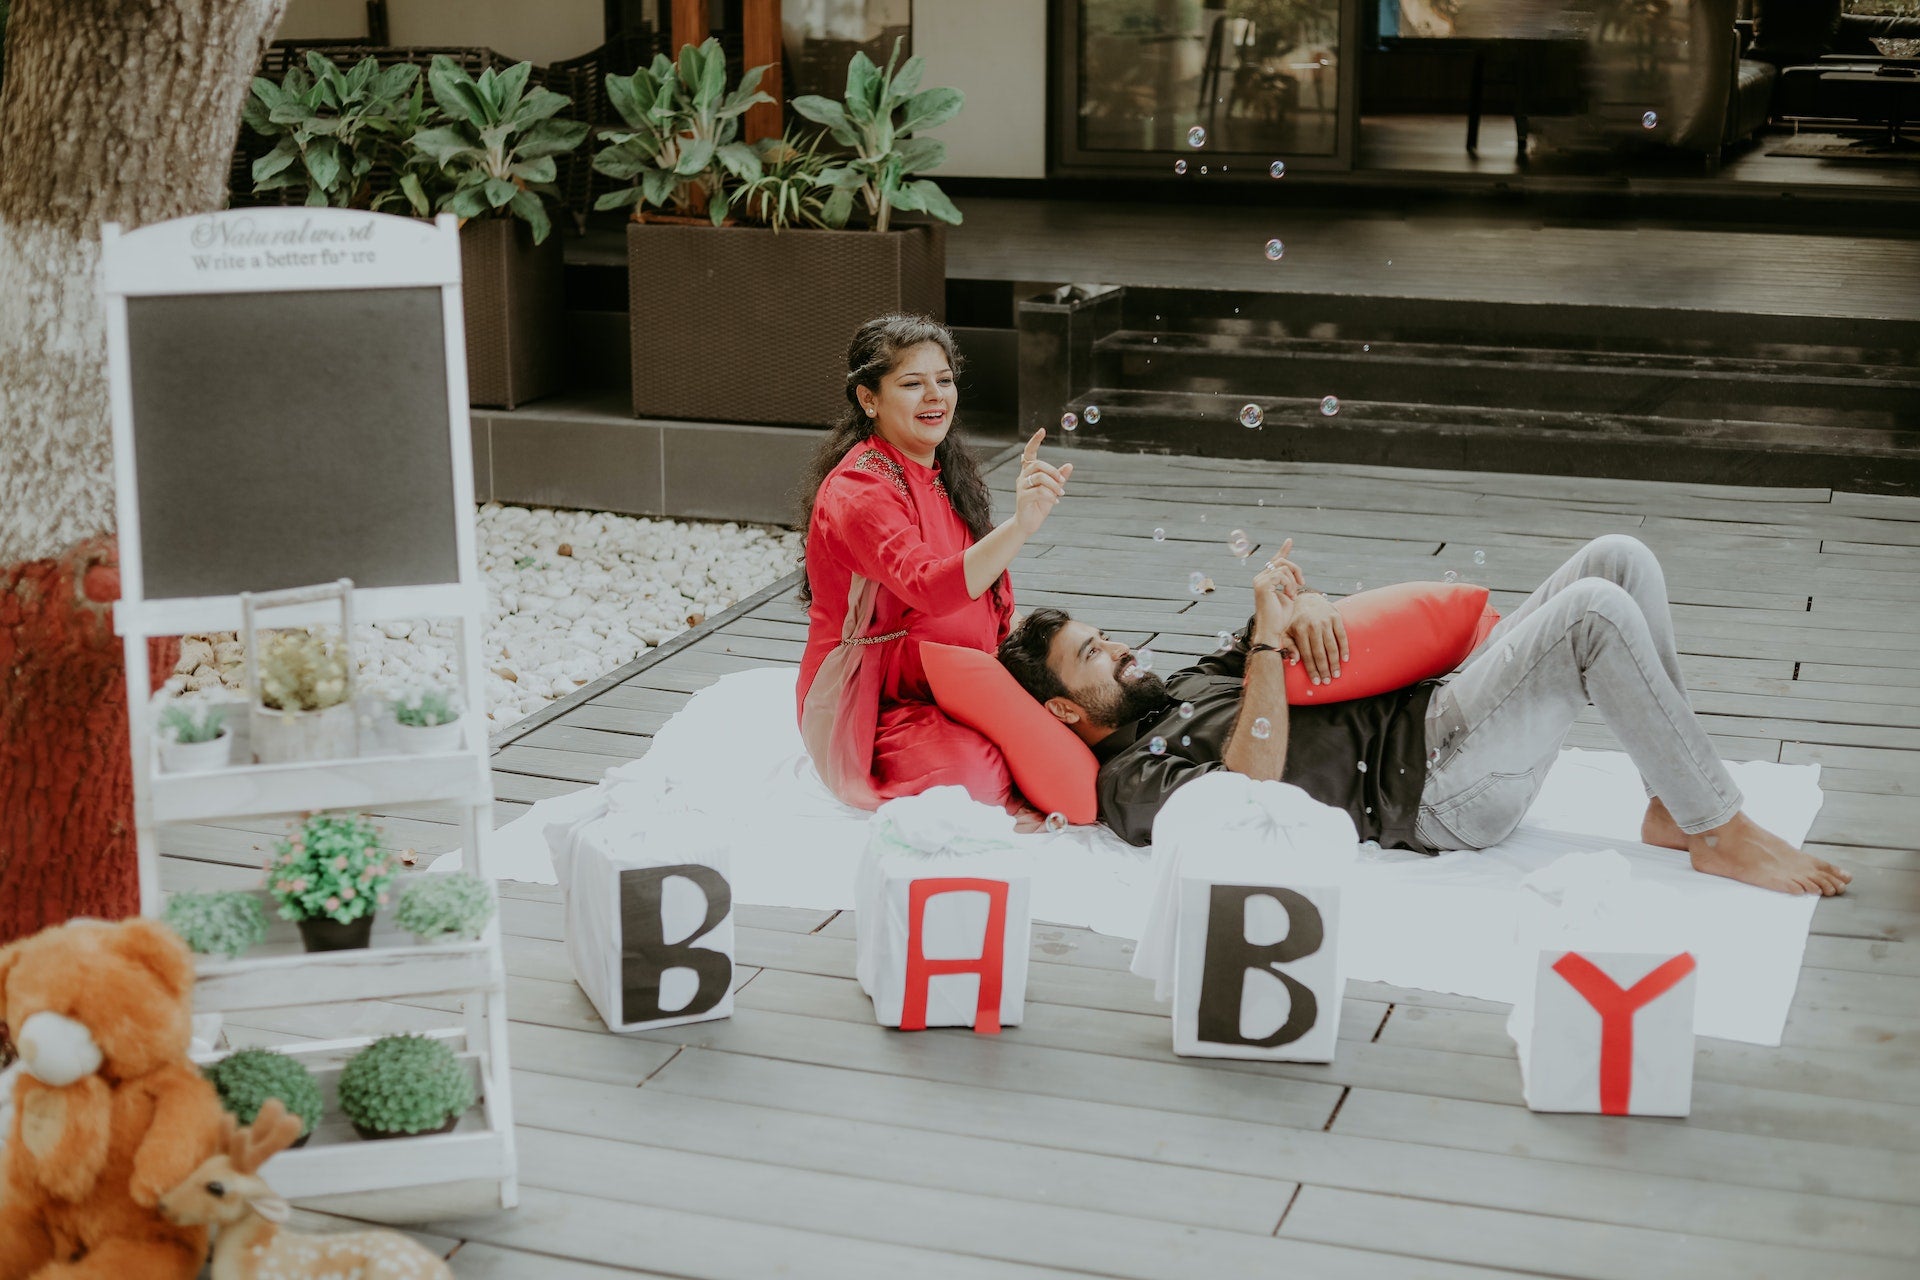 Find inspiration for heartfelt baby shower card messages! Explore thoughtful ideas & tips to convey your love and best wishes for the mom-to-be & baby.